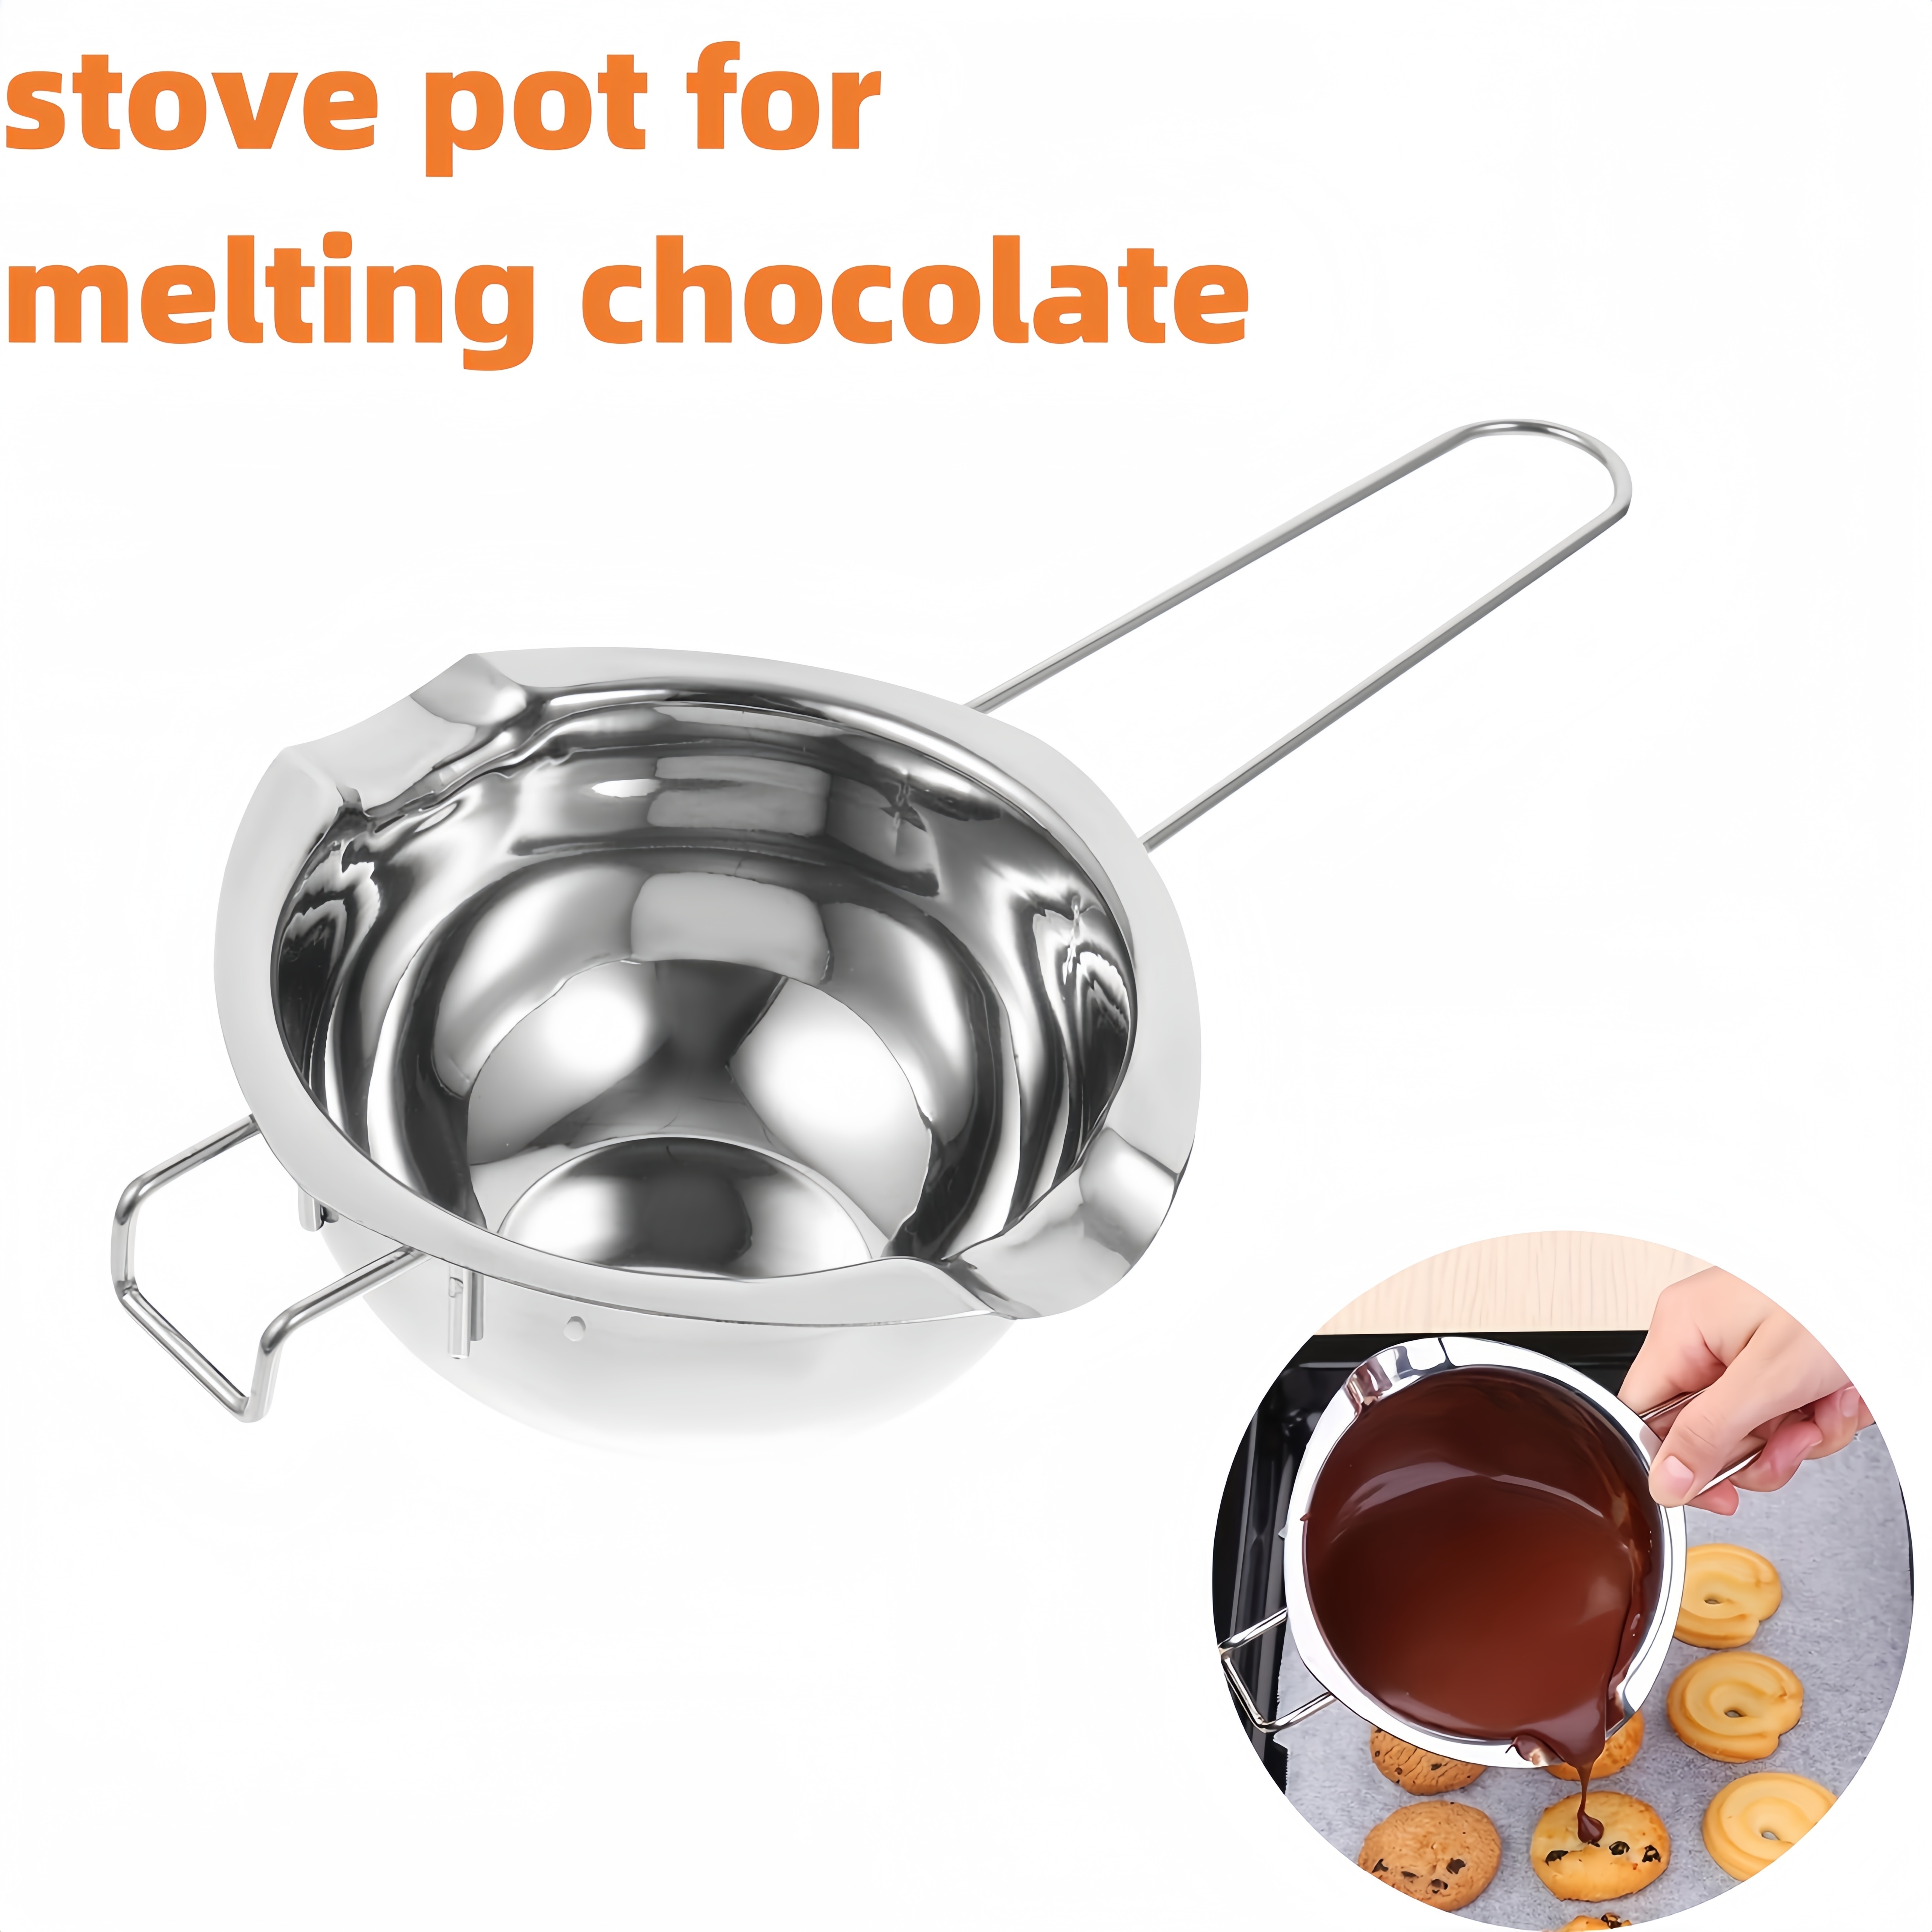 

1pc Stainless Steel Melting Pot, 5.5in/14cm, For Chocolate, Cheese, Candy, Butter Making - Kitchen Stovetop Cookware, Suitable For Bakery Pastry Shop Eid Al-adha Mubarak